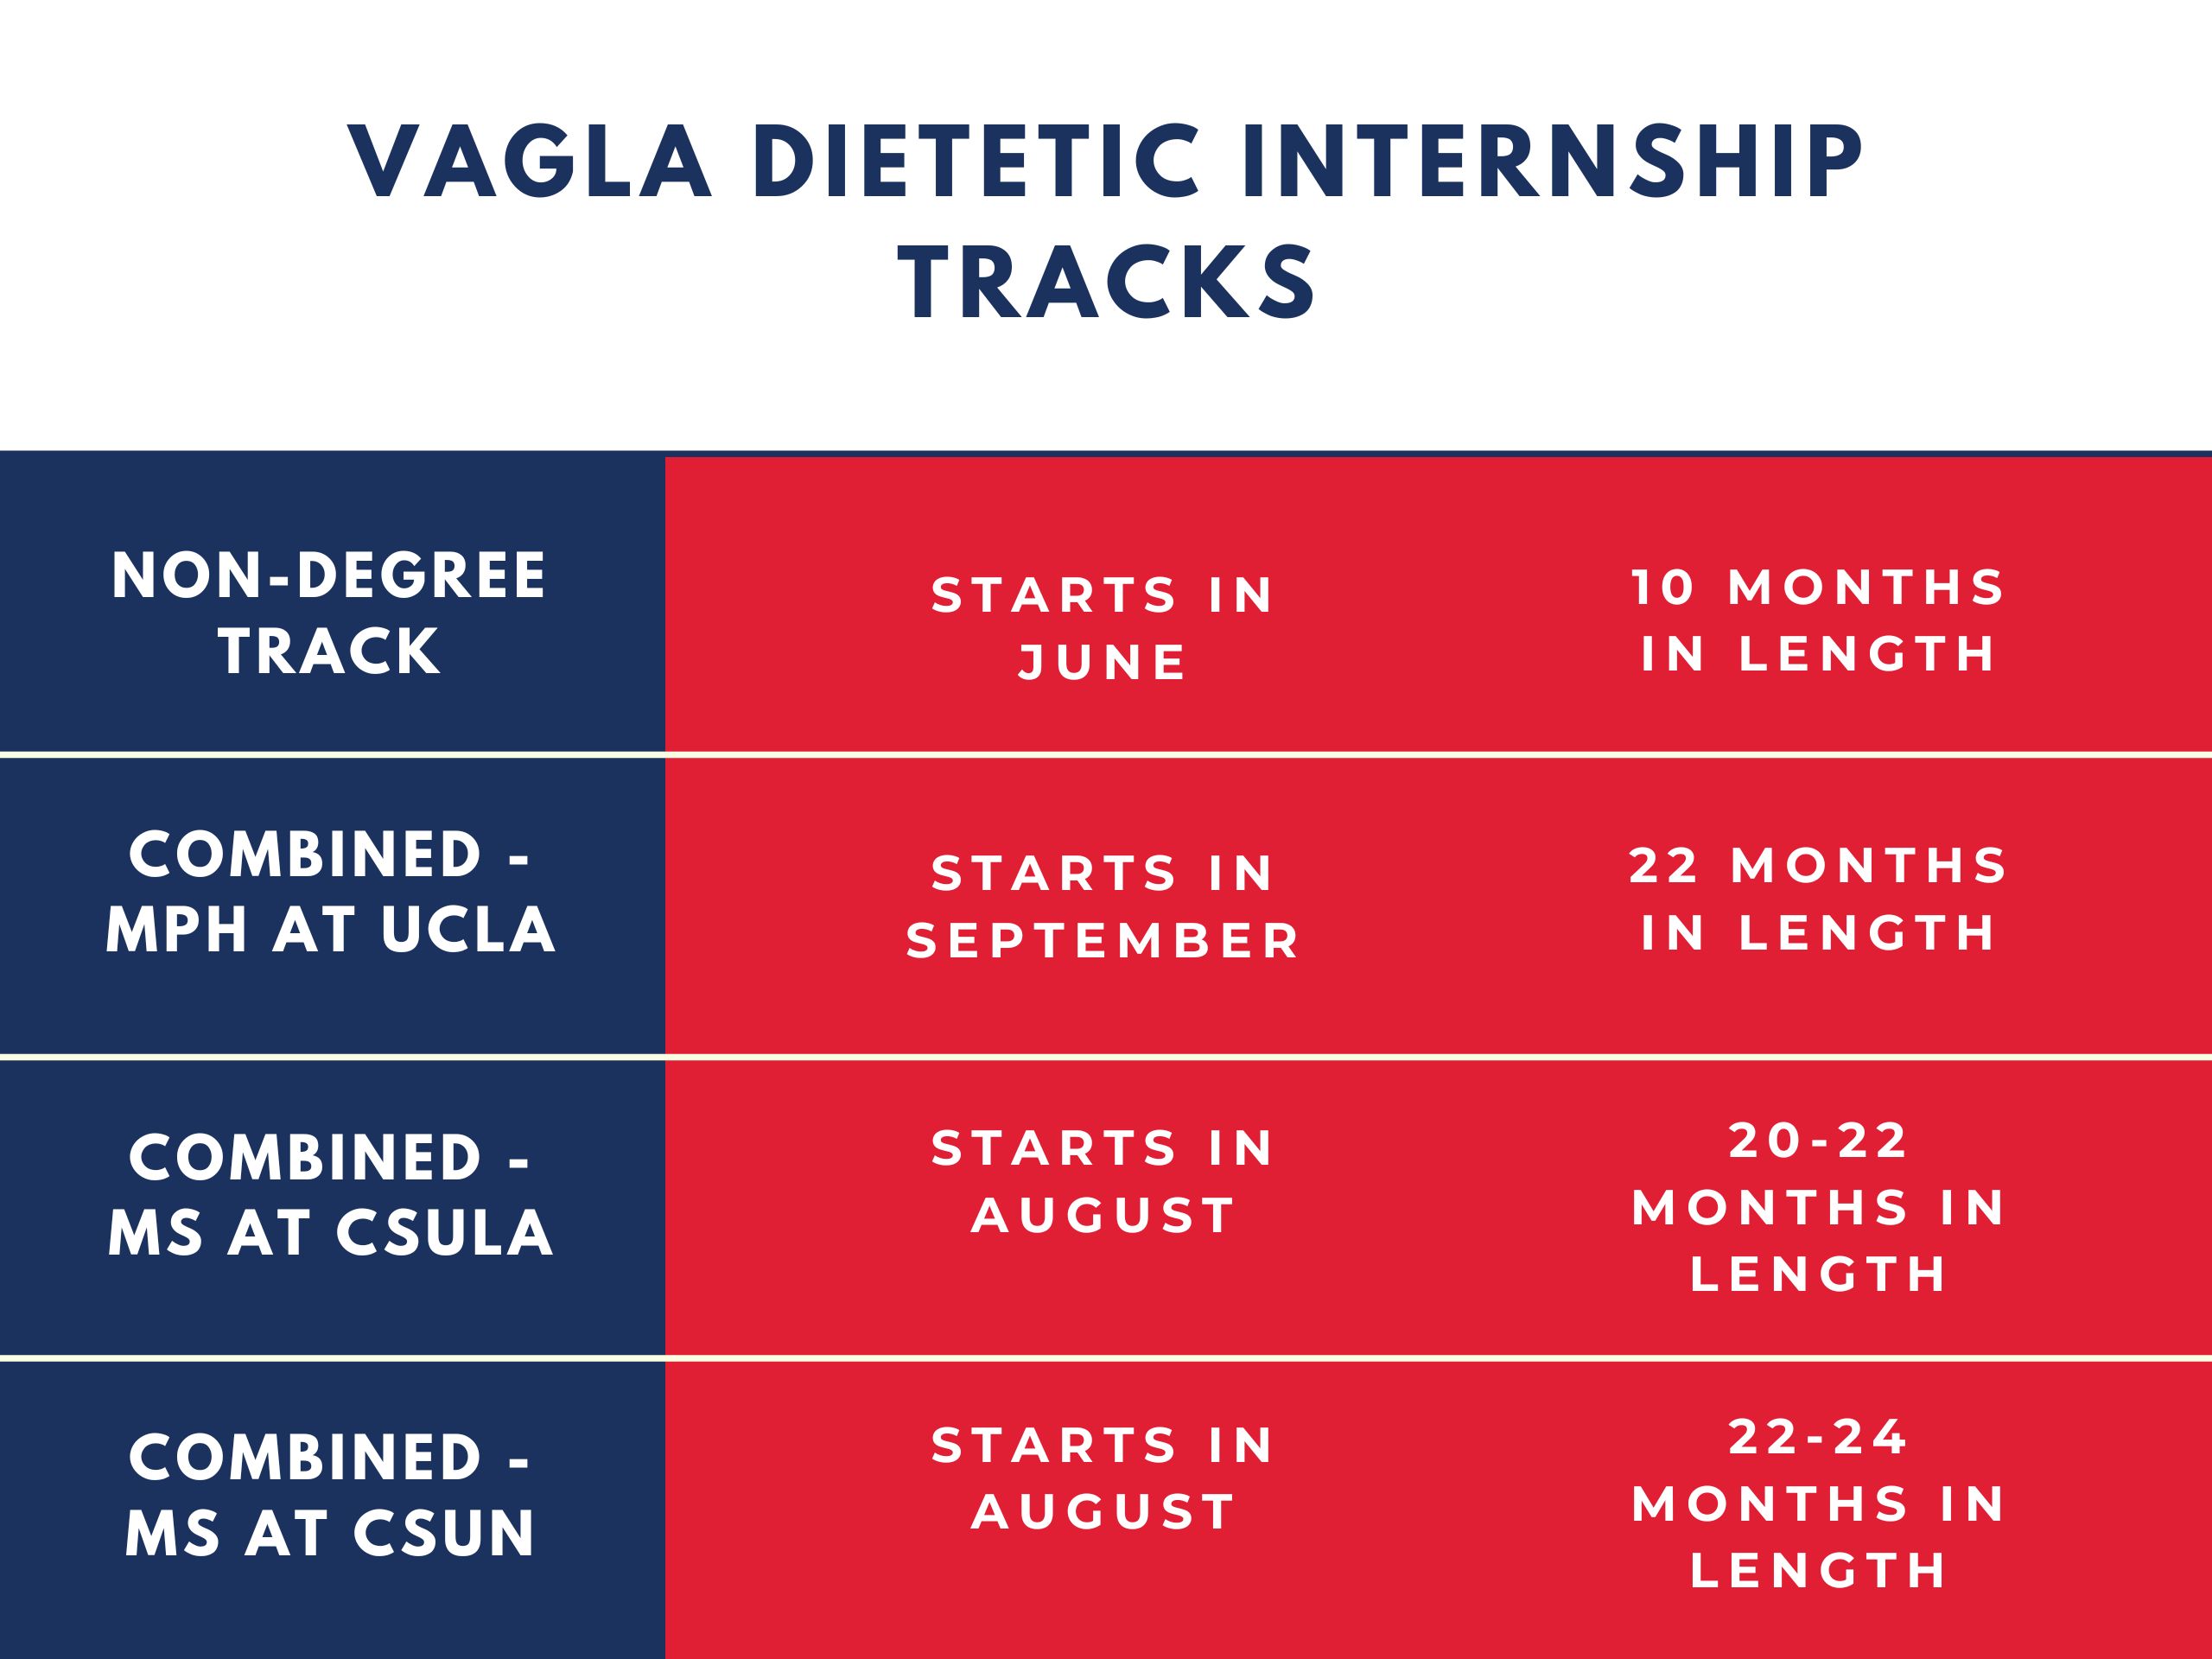 This graphic describes the VAGLAHS DI Tracks. The non-degree track starts in June and is 10 months in length. The Combined MPH track starts in September and is 22 months in length. The Combined MS programs at CSULA and CSUN start in August and are 20 to 24 months in length.